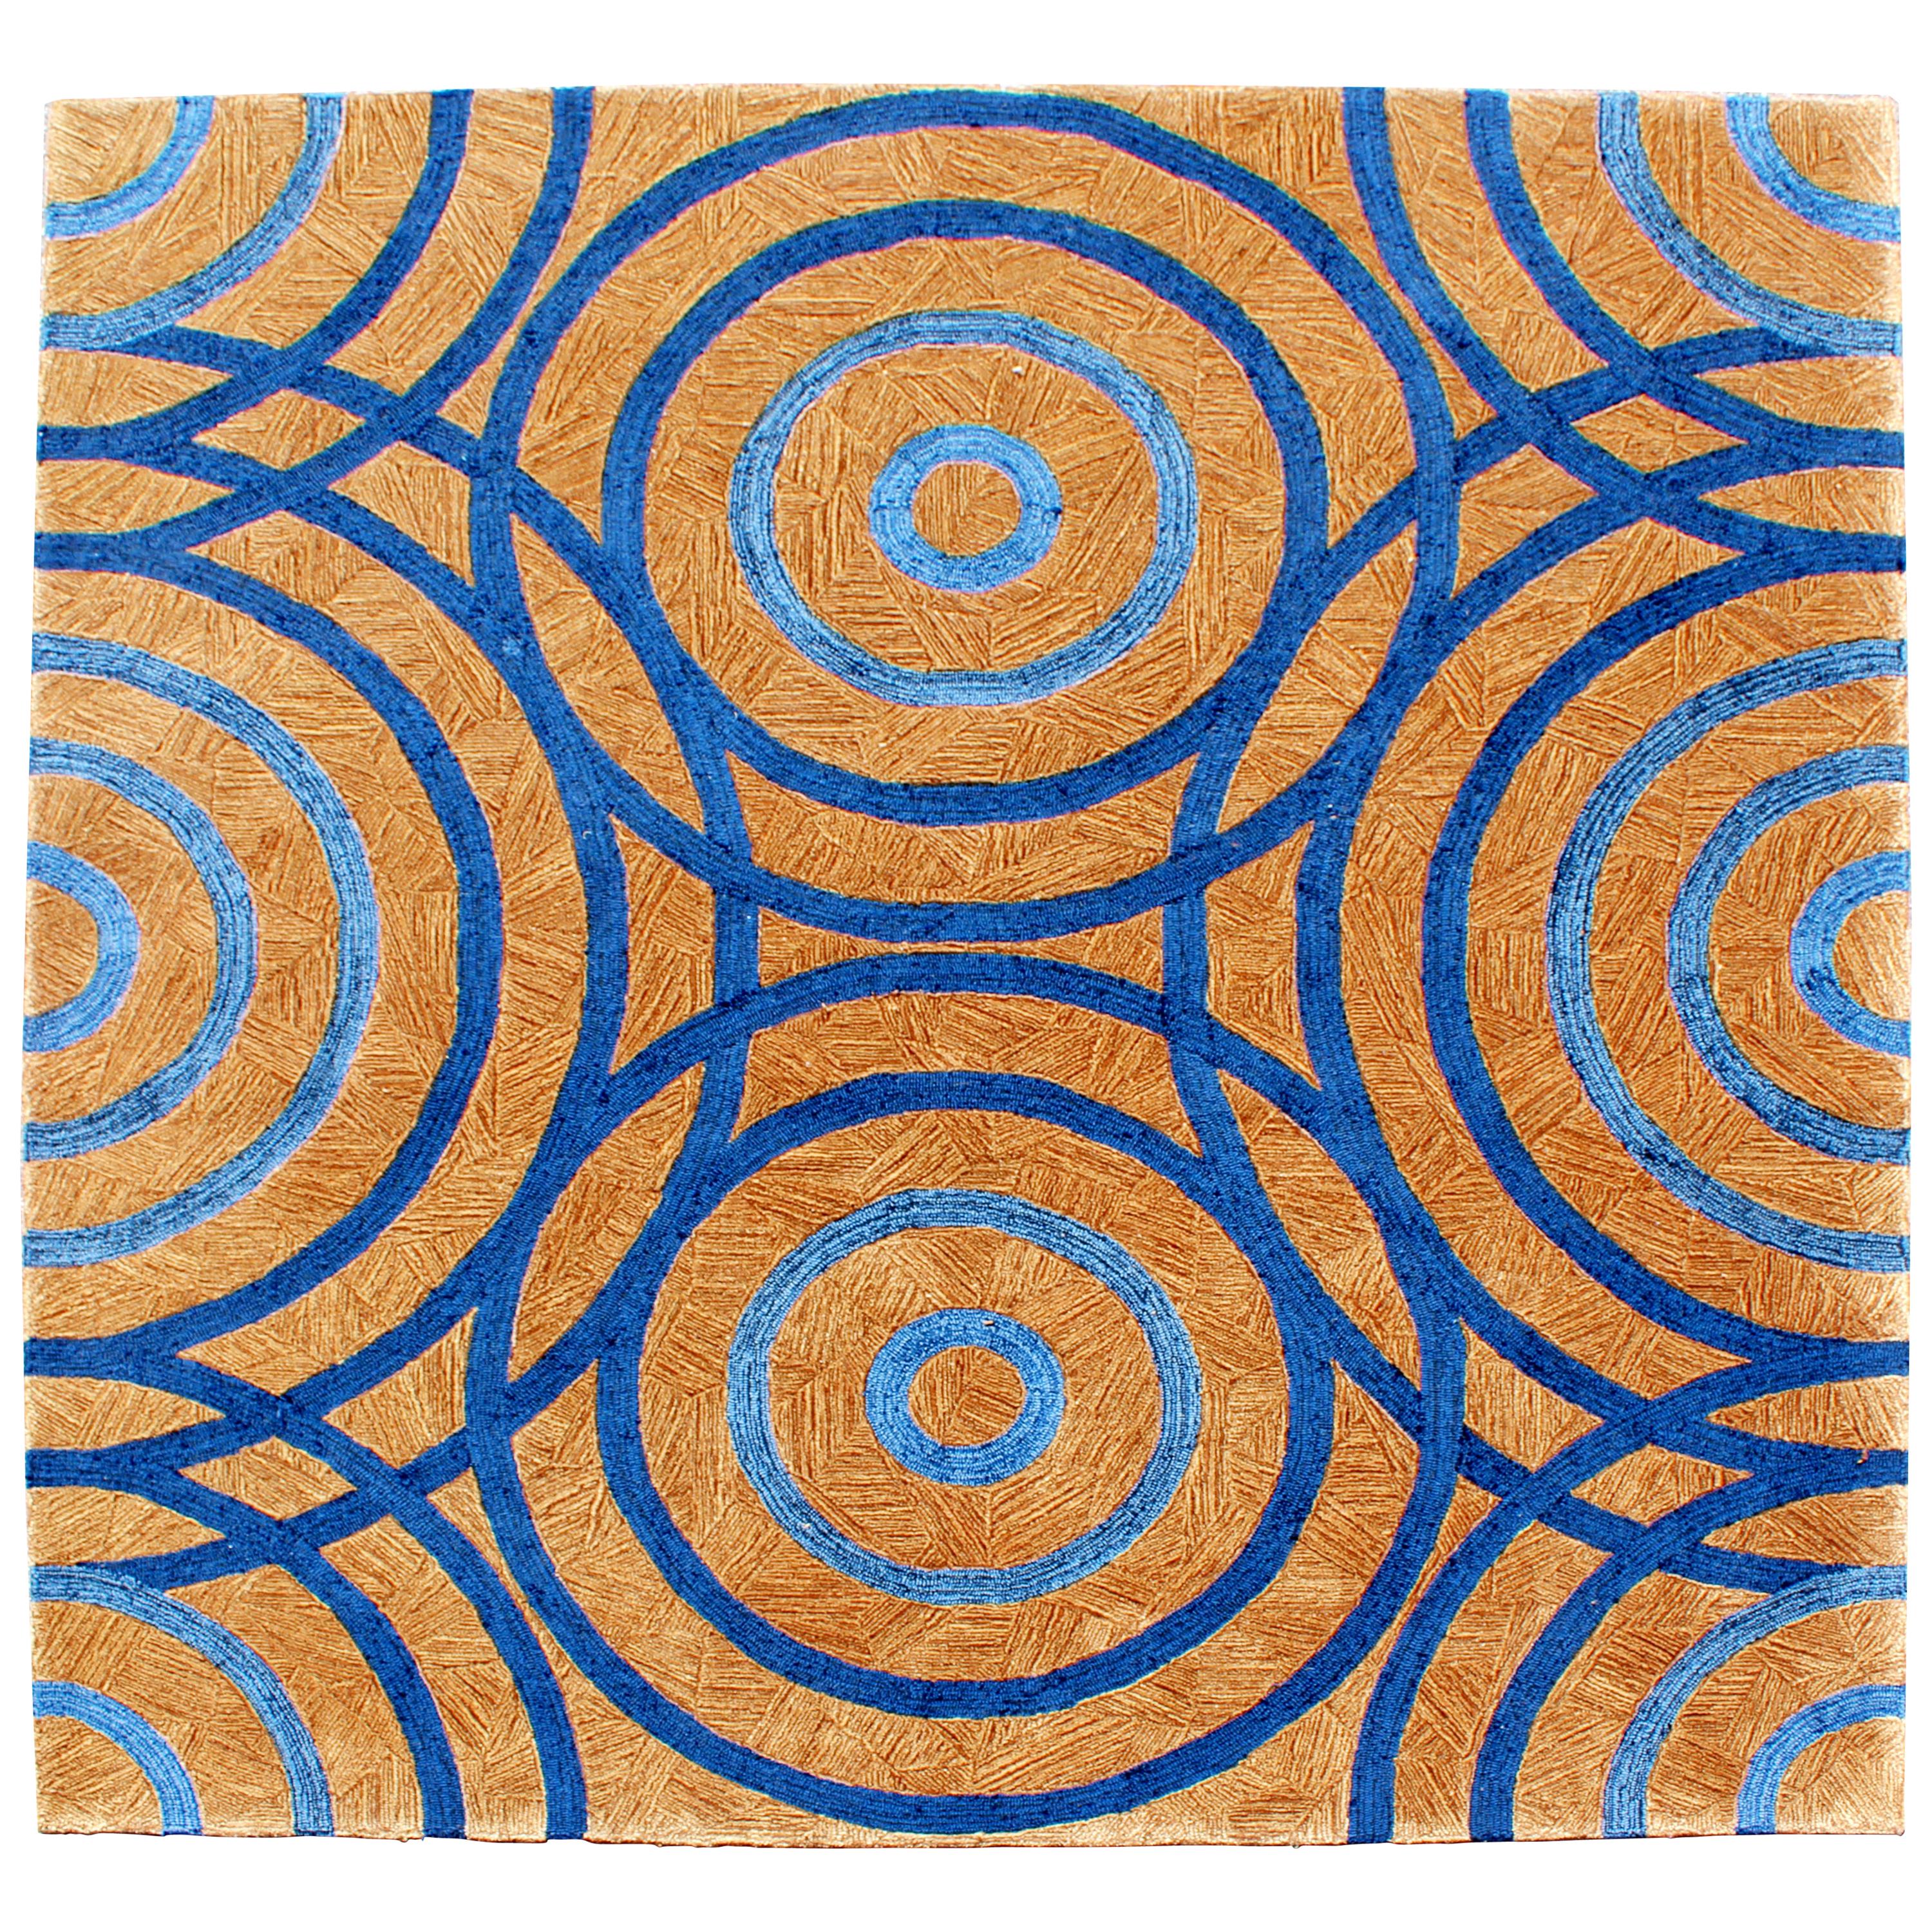 Contemporary Modernist 100% Wool Area Rug Carpet Signed by Edward Fields, 1999